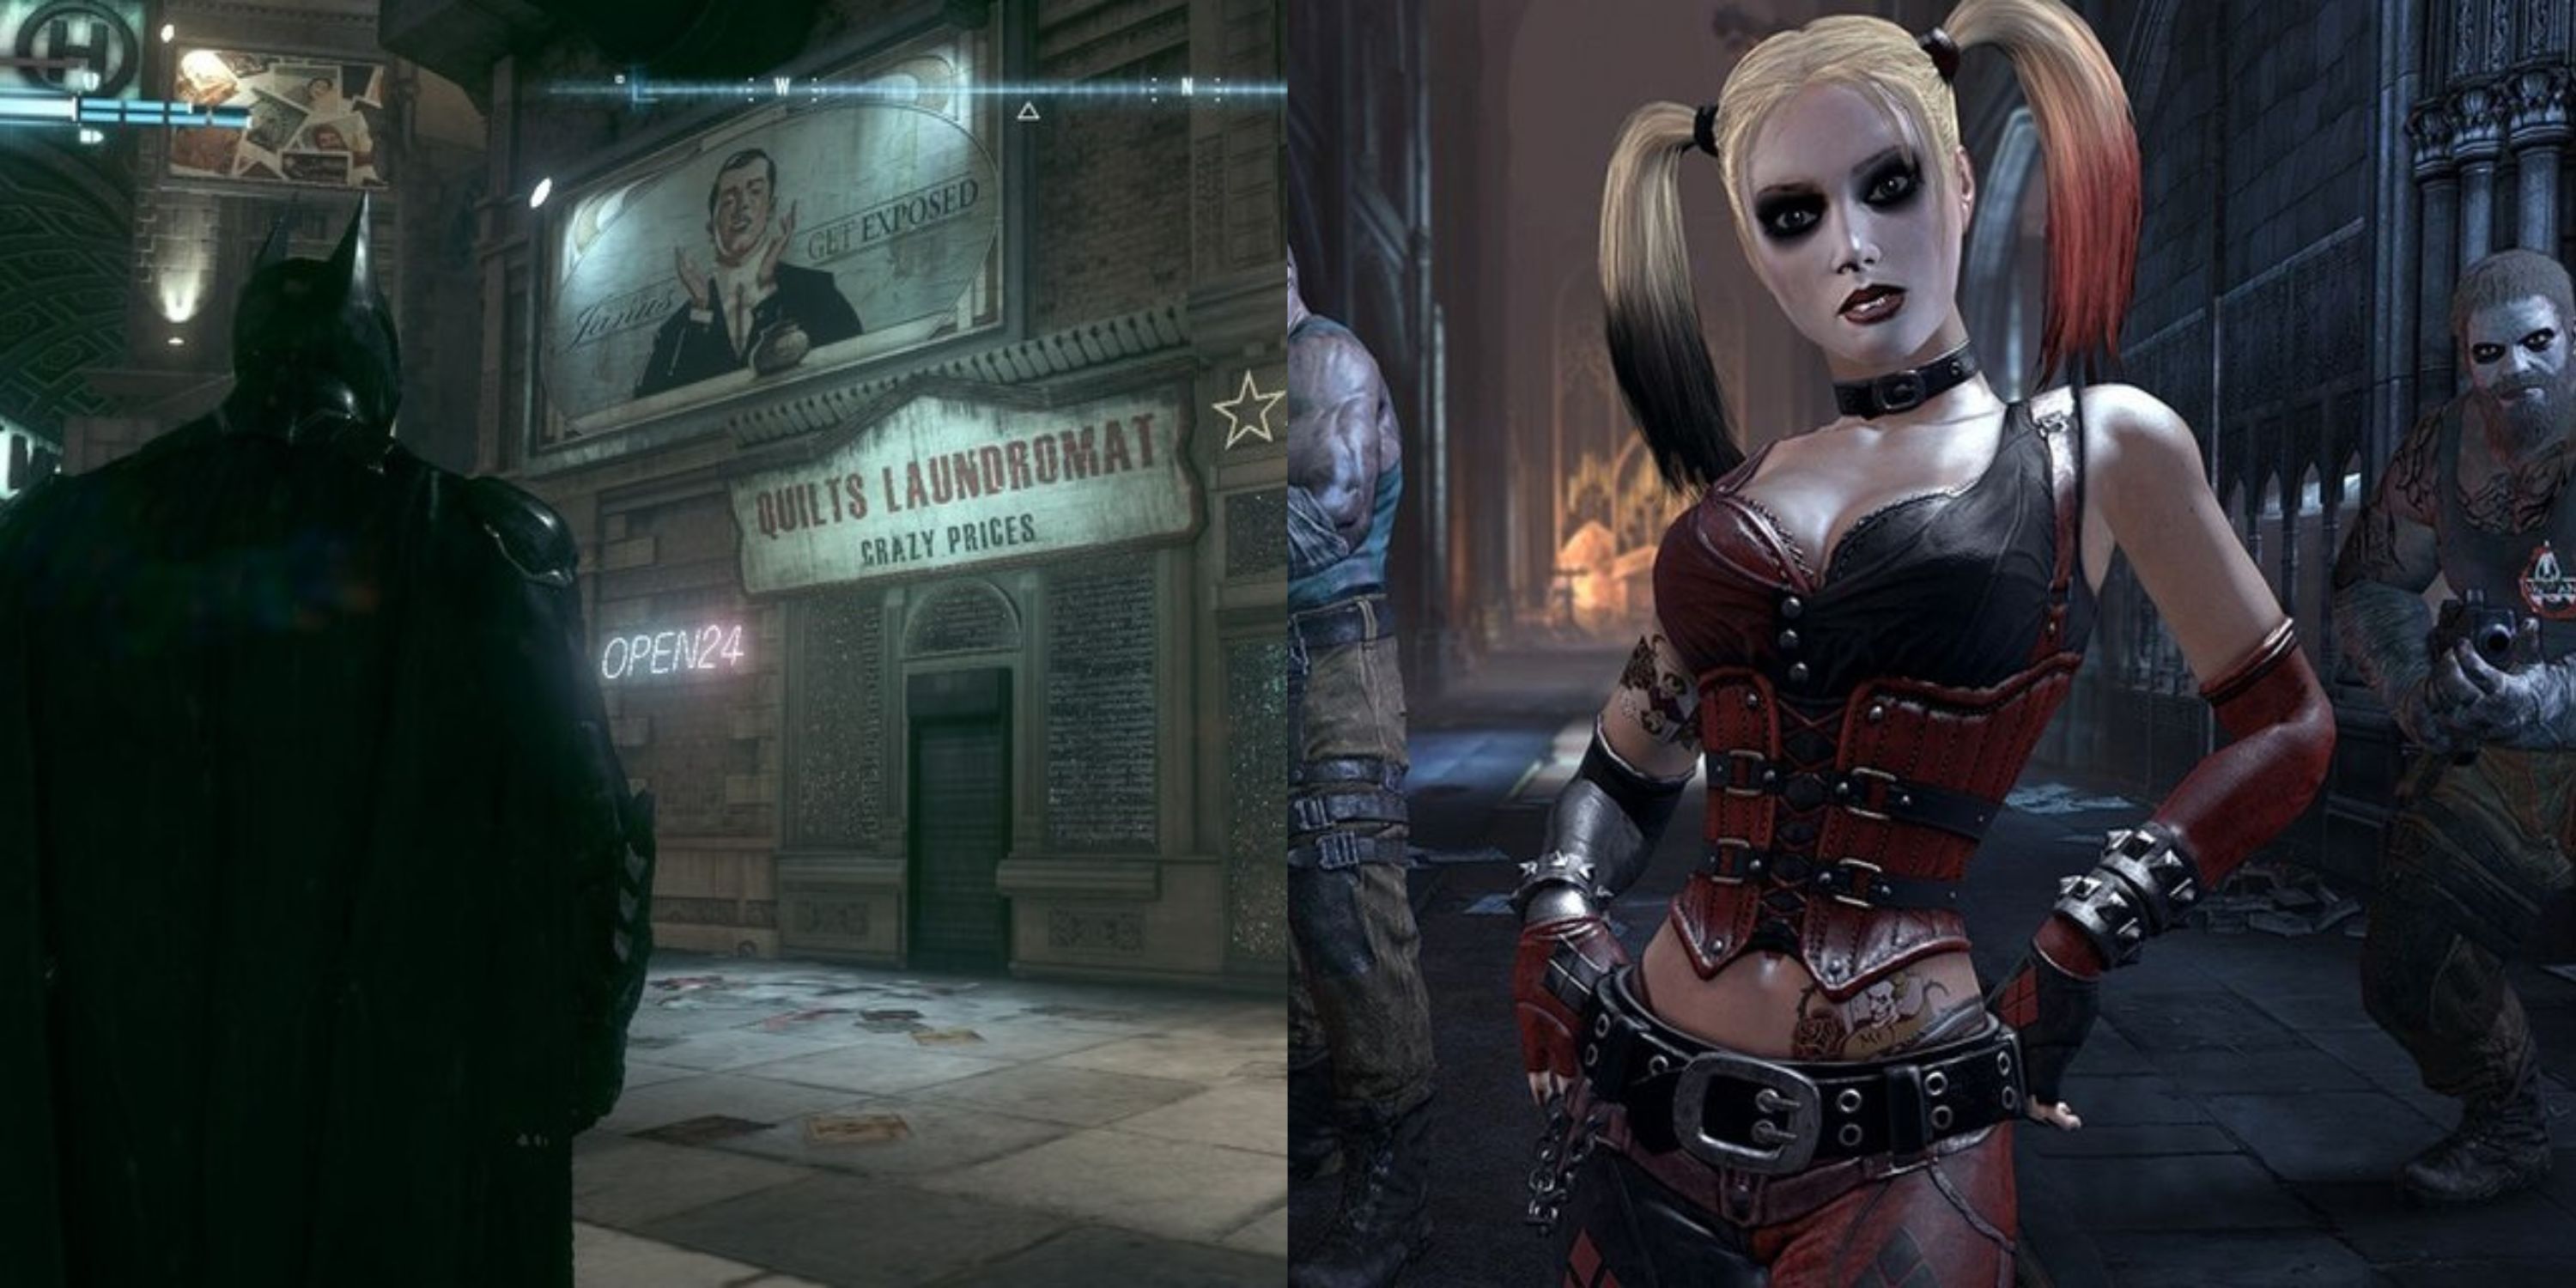 Featured image Quilts Laundromat hidden detail in Batman Arkham Knight and Harley Quinn in Arkham City